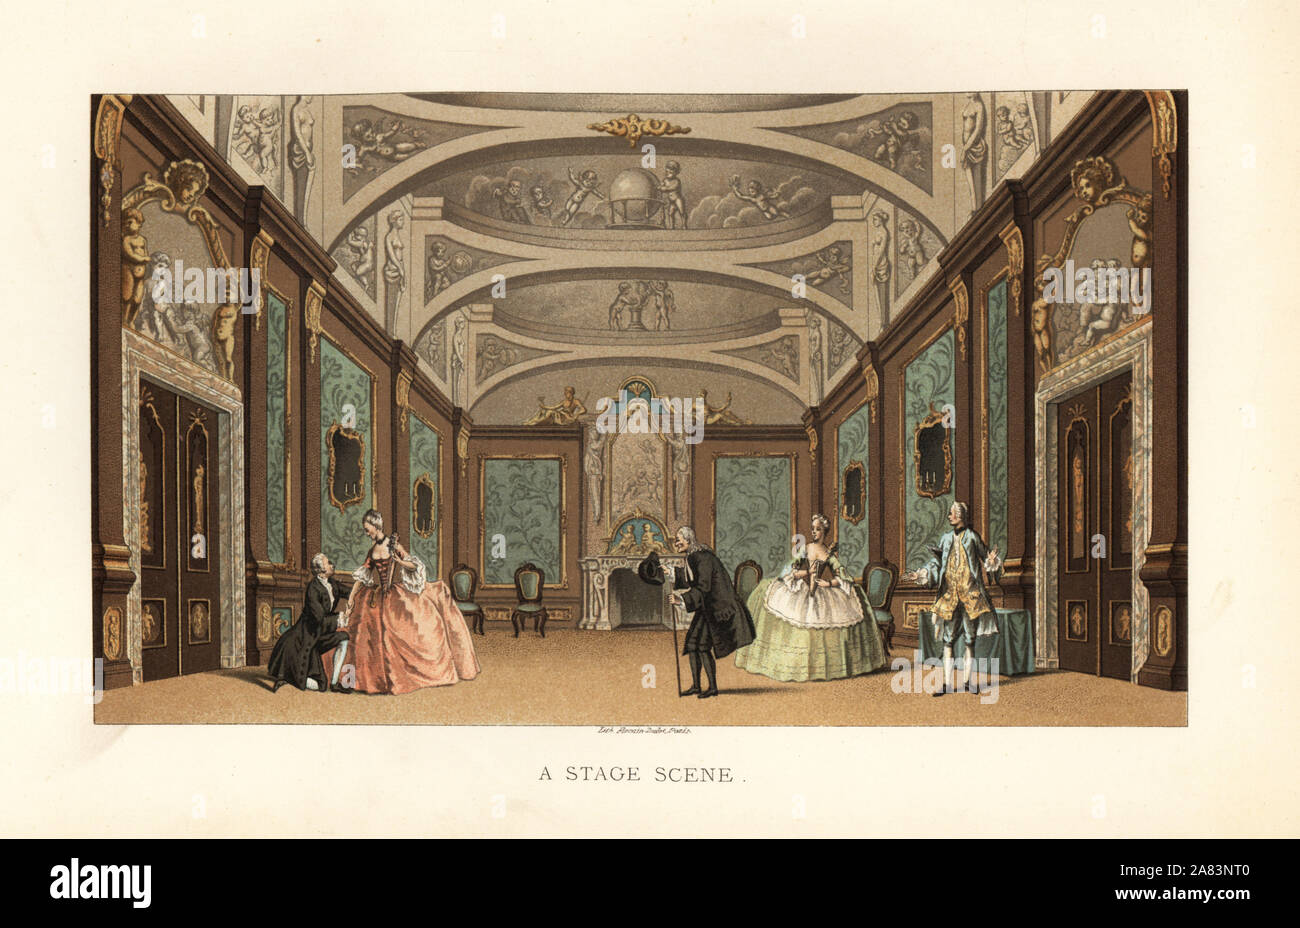 Scene from a stage play in an 18th century Paris theatre. Chromolithograph from Paul Lacroix' The Eighteenth Century: Its Institutions, Customs, and Costumes, London, 1876. Stock Photo